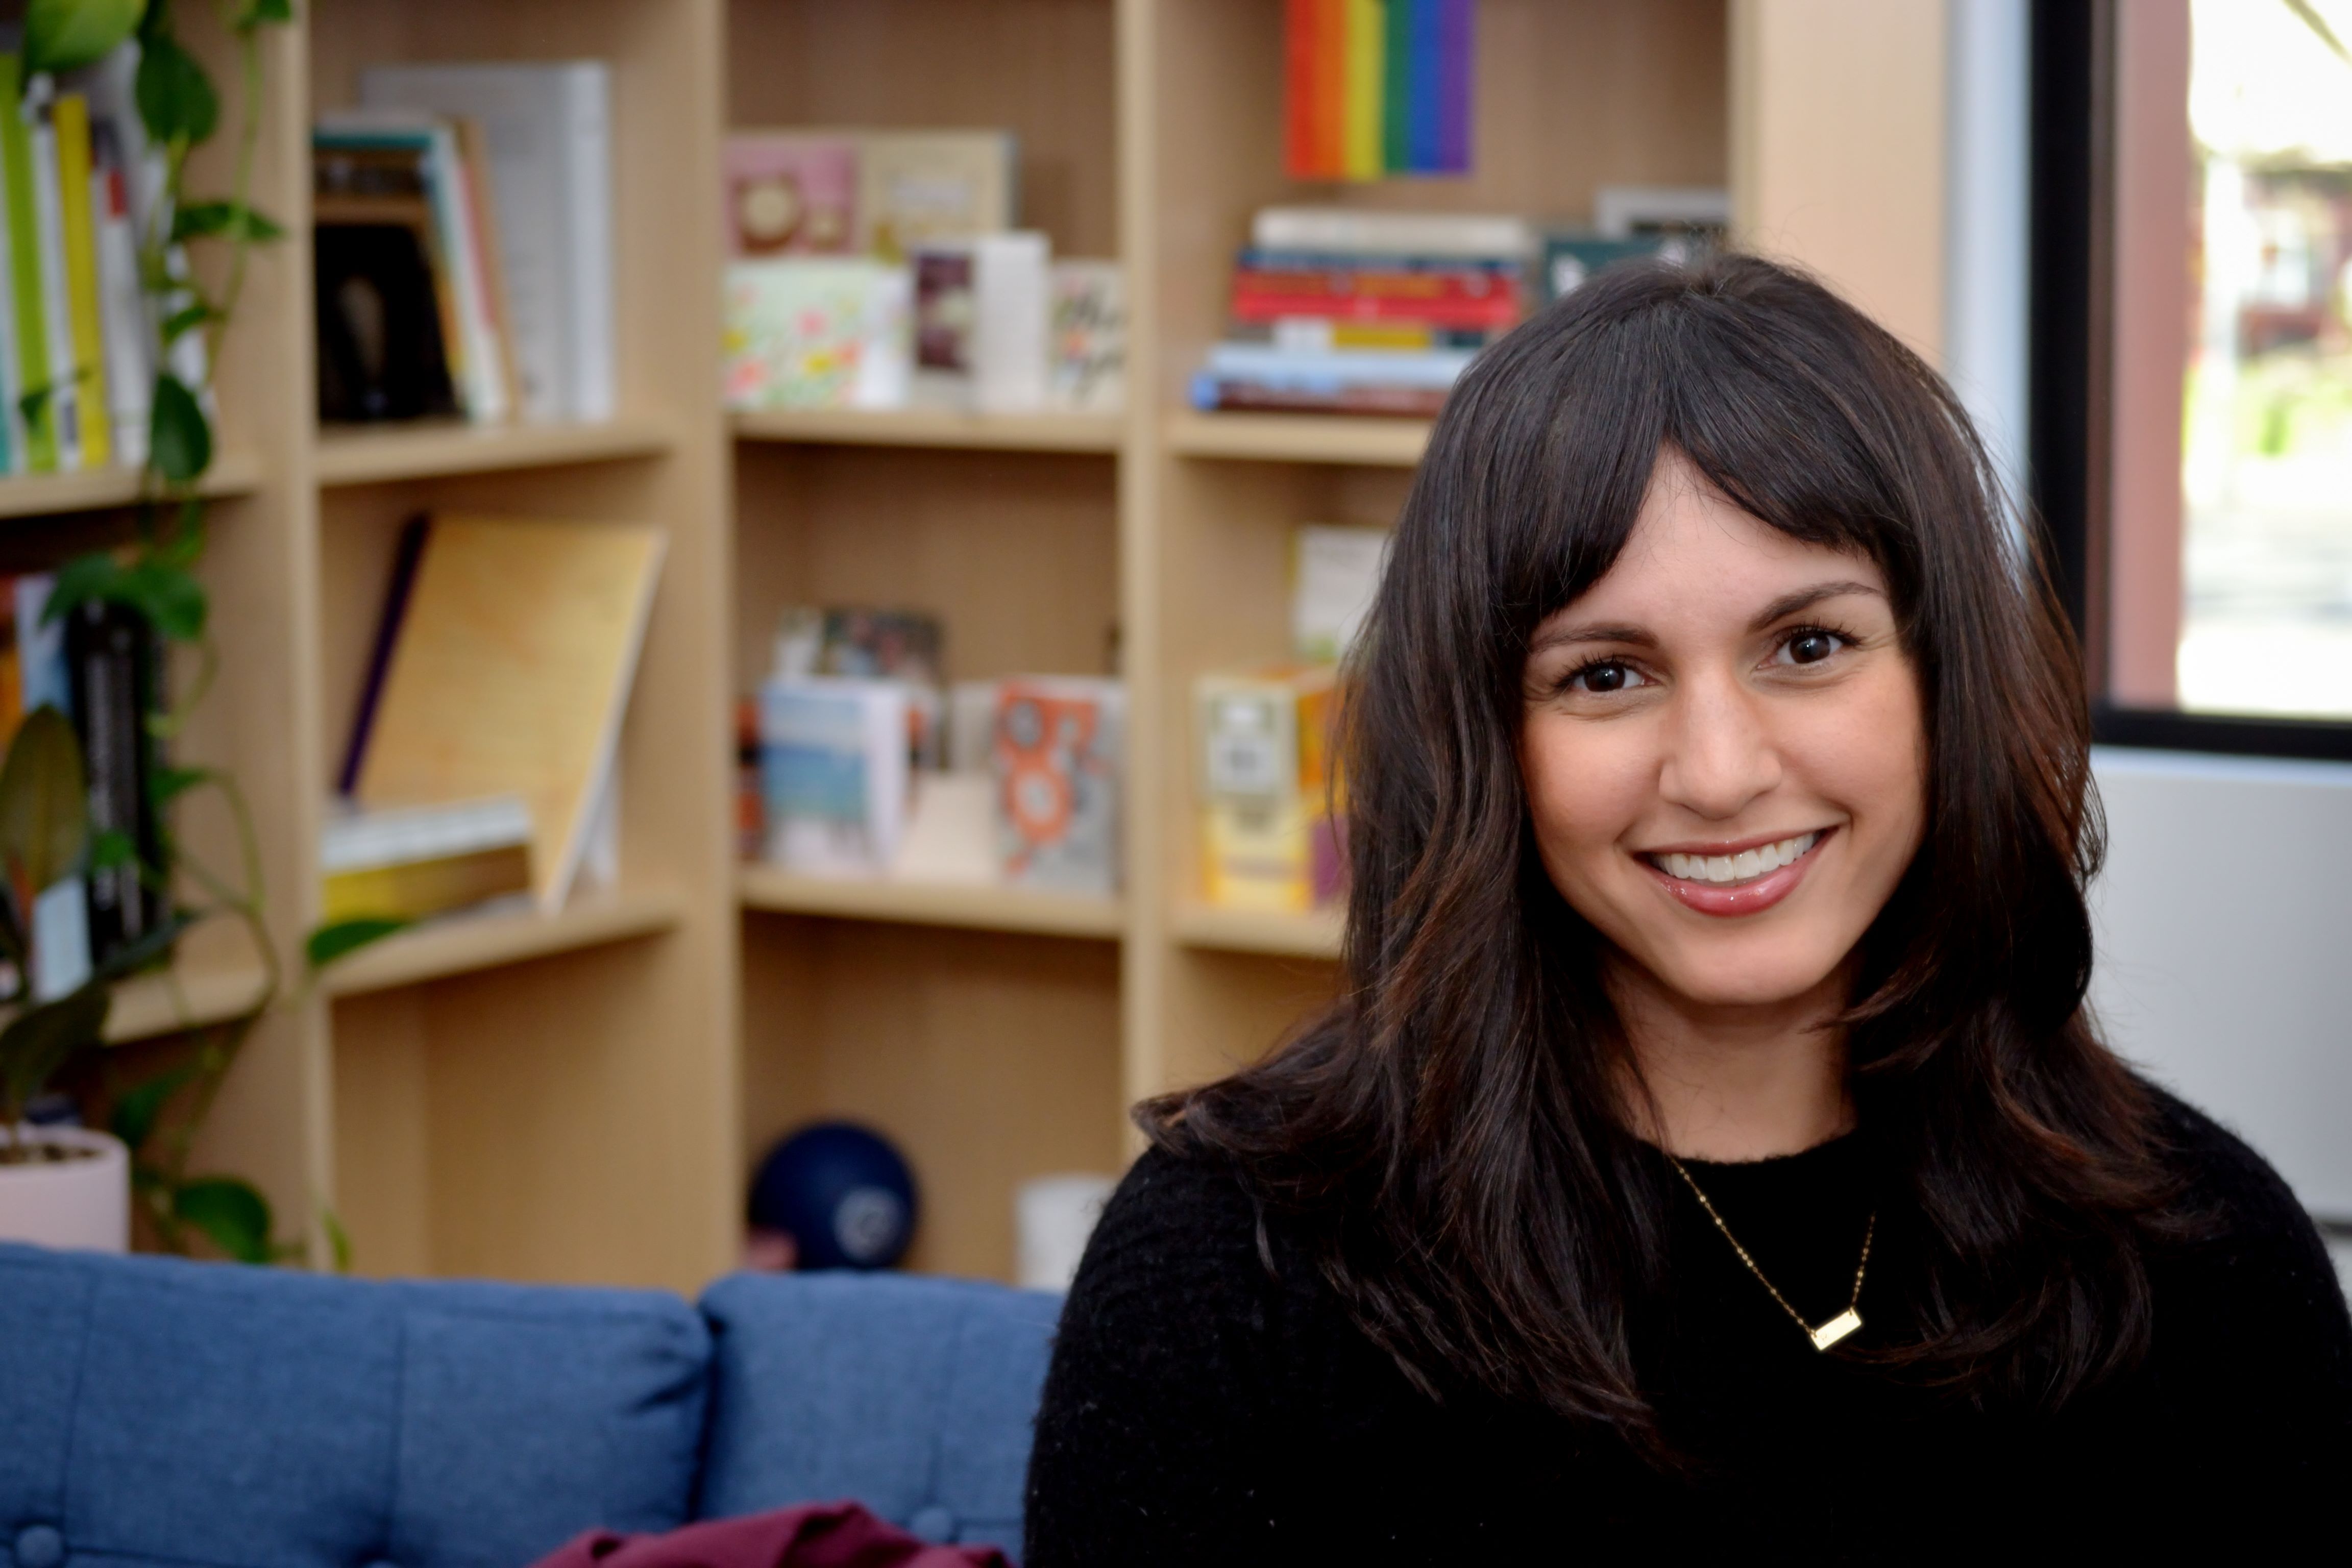 Rana sits to the right of the frame, facing the camera and smiling, with shelves of items behind her